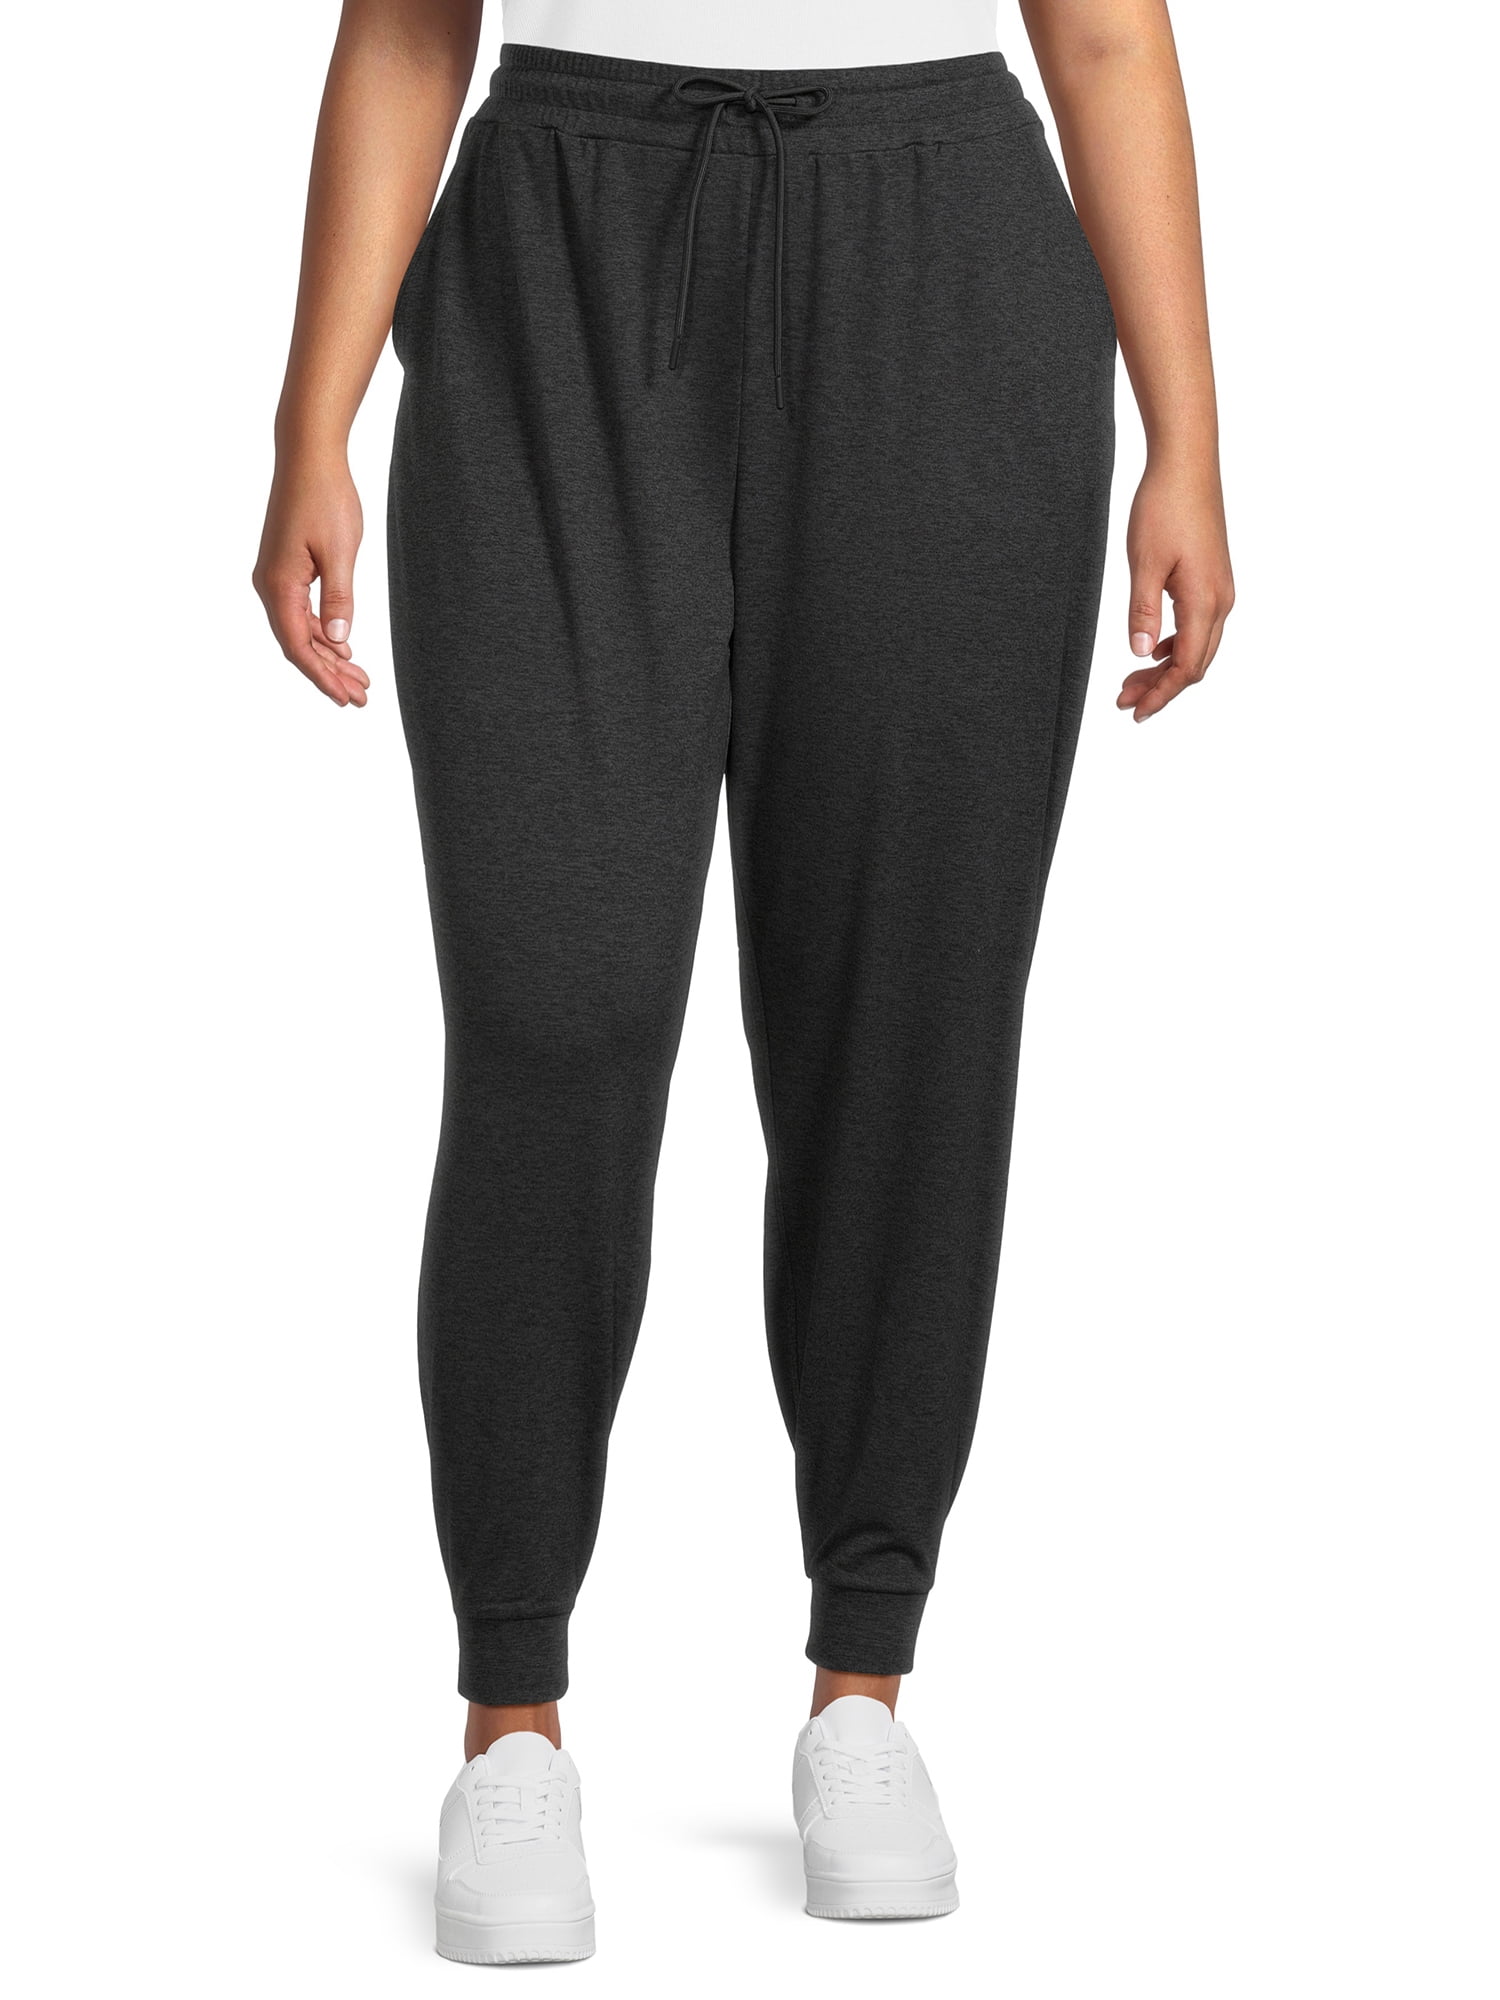 Athletic Works Women's and Women's Plus BUTTERCORE Lightweight Joggers,  Sizes XS-4X